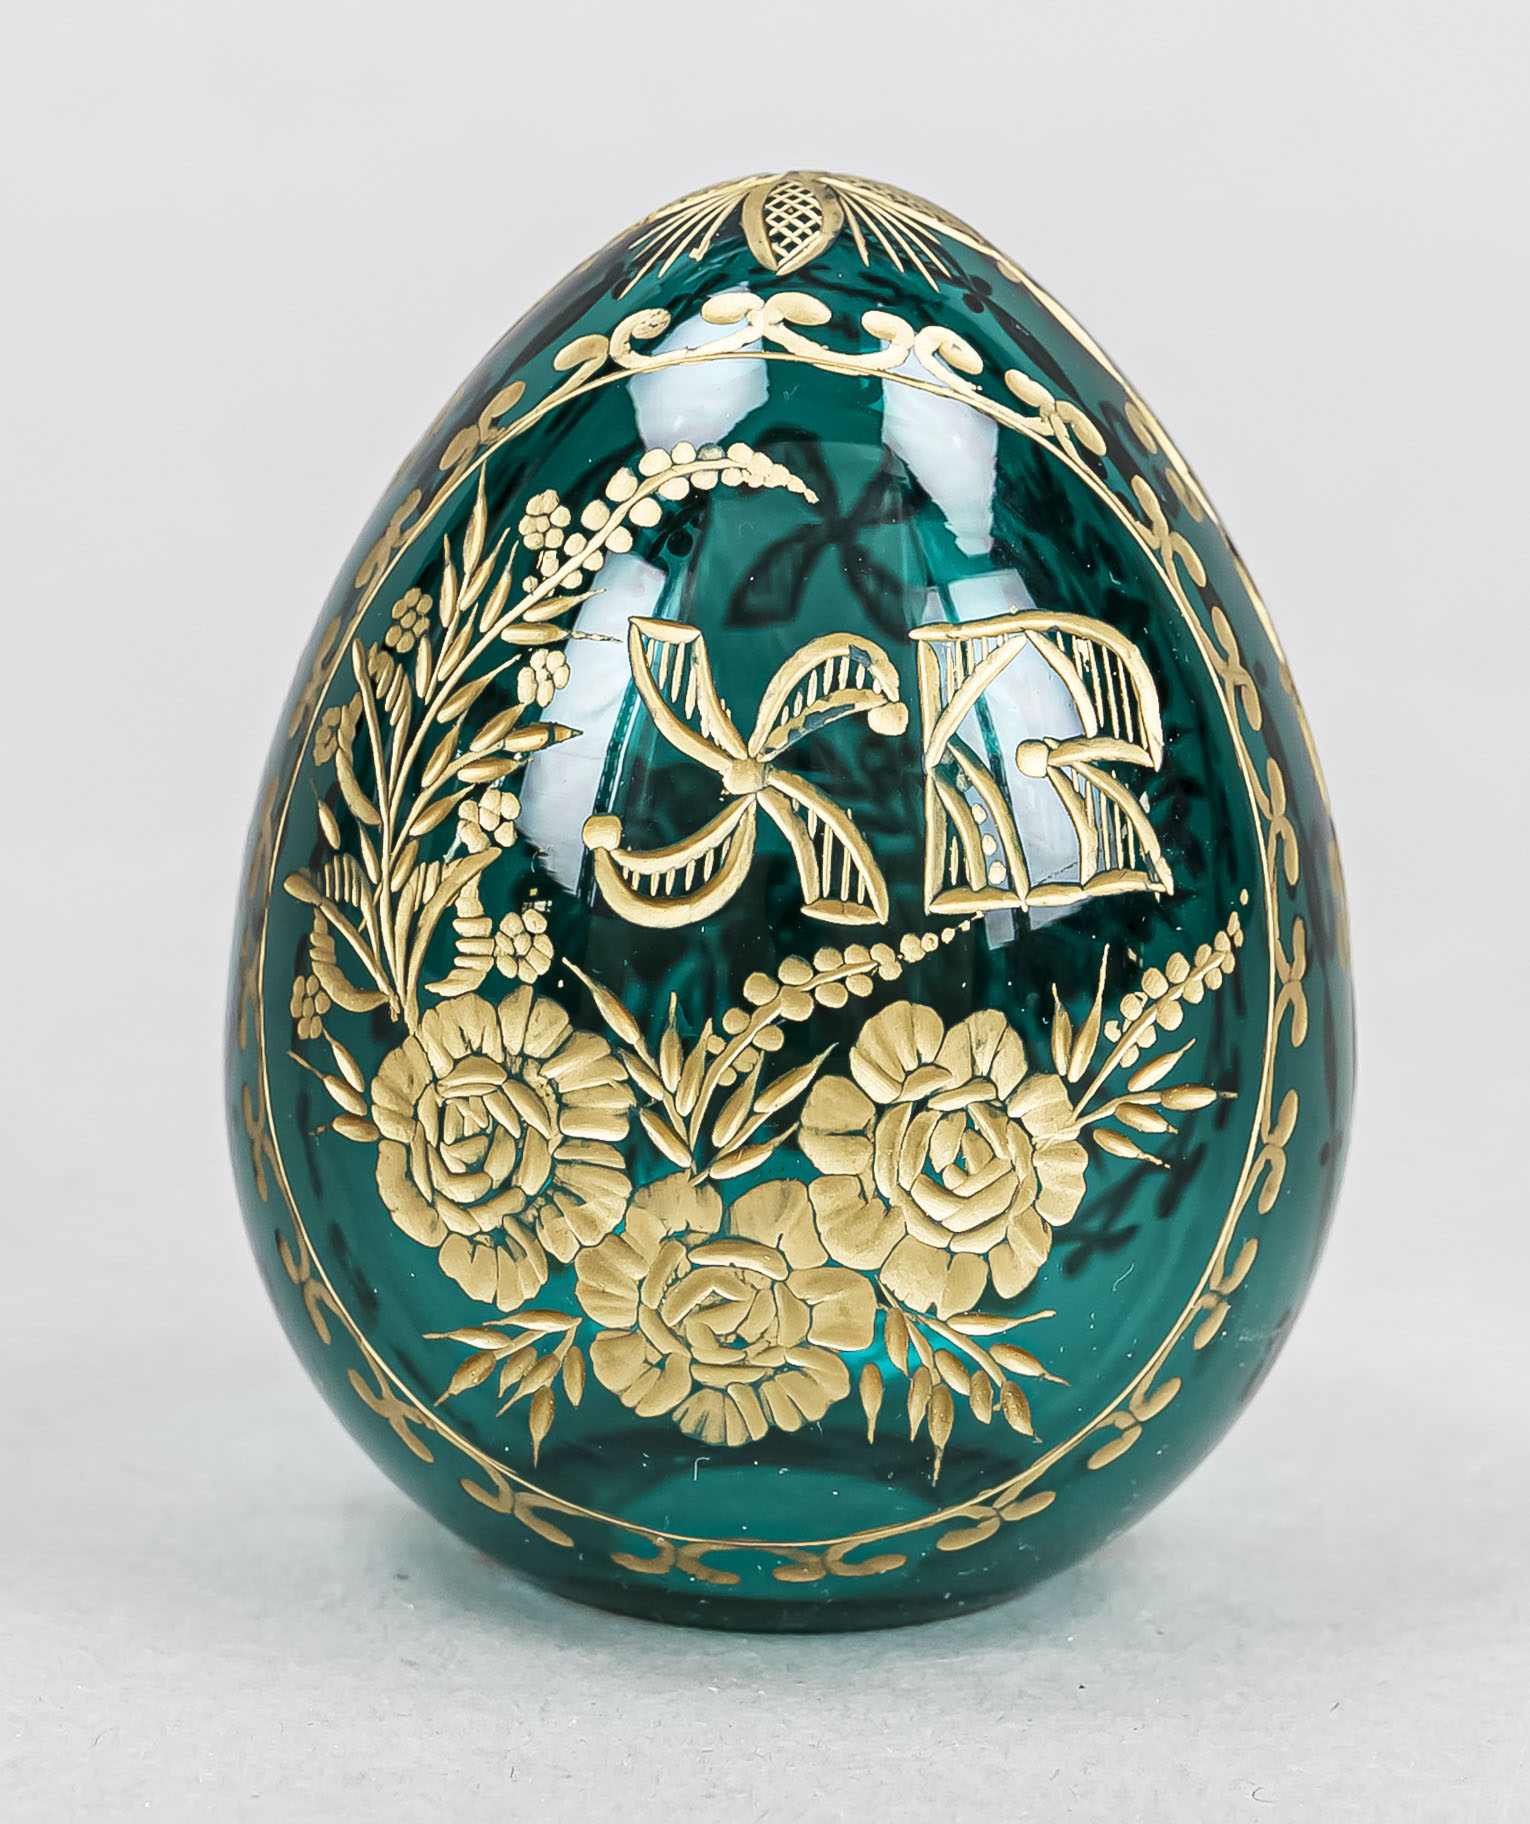 Ornament, 20th century, blue-green glass with floral engraved decoration and monogram, gold